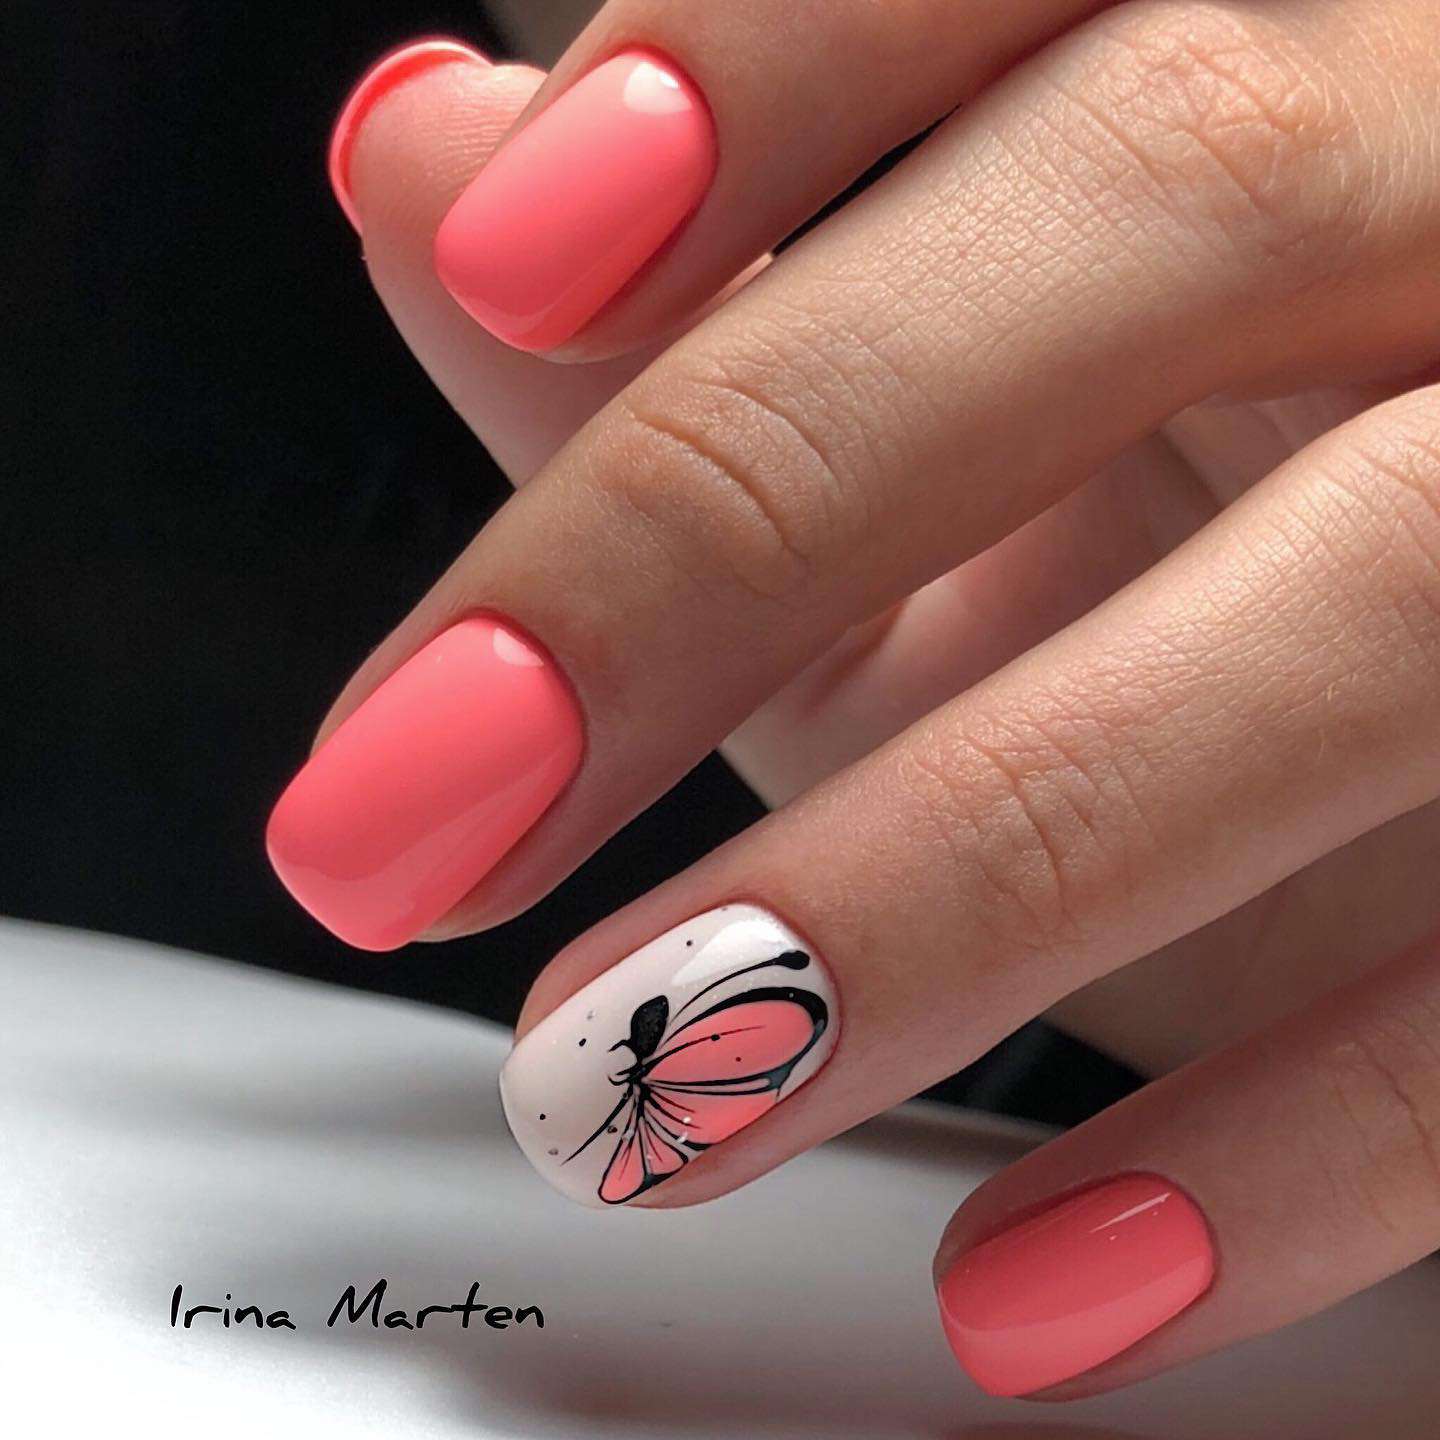 50 Best Nail Designs Trends To Try Out In 2022 images 35